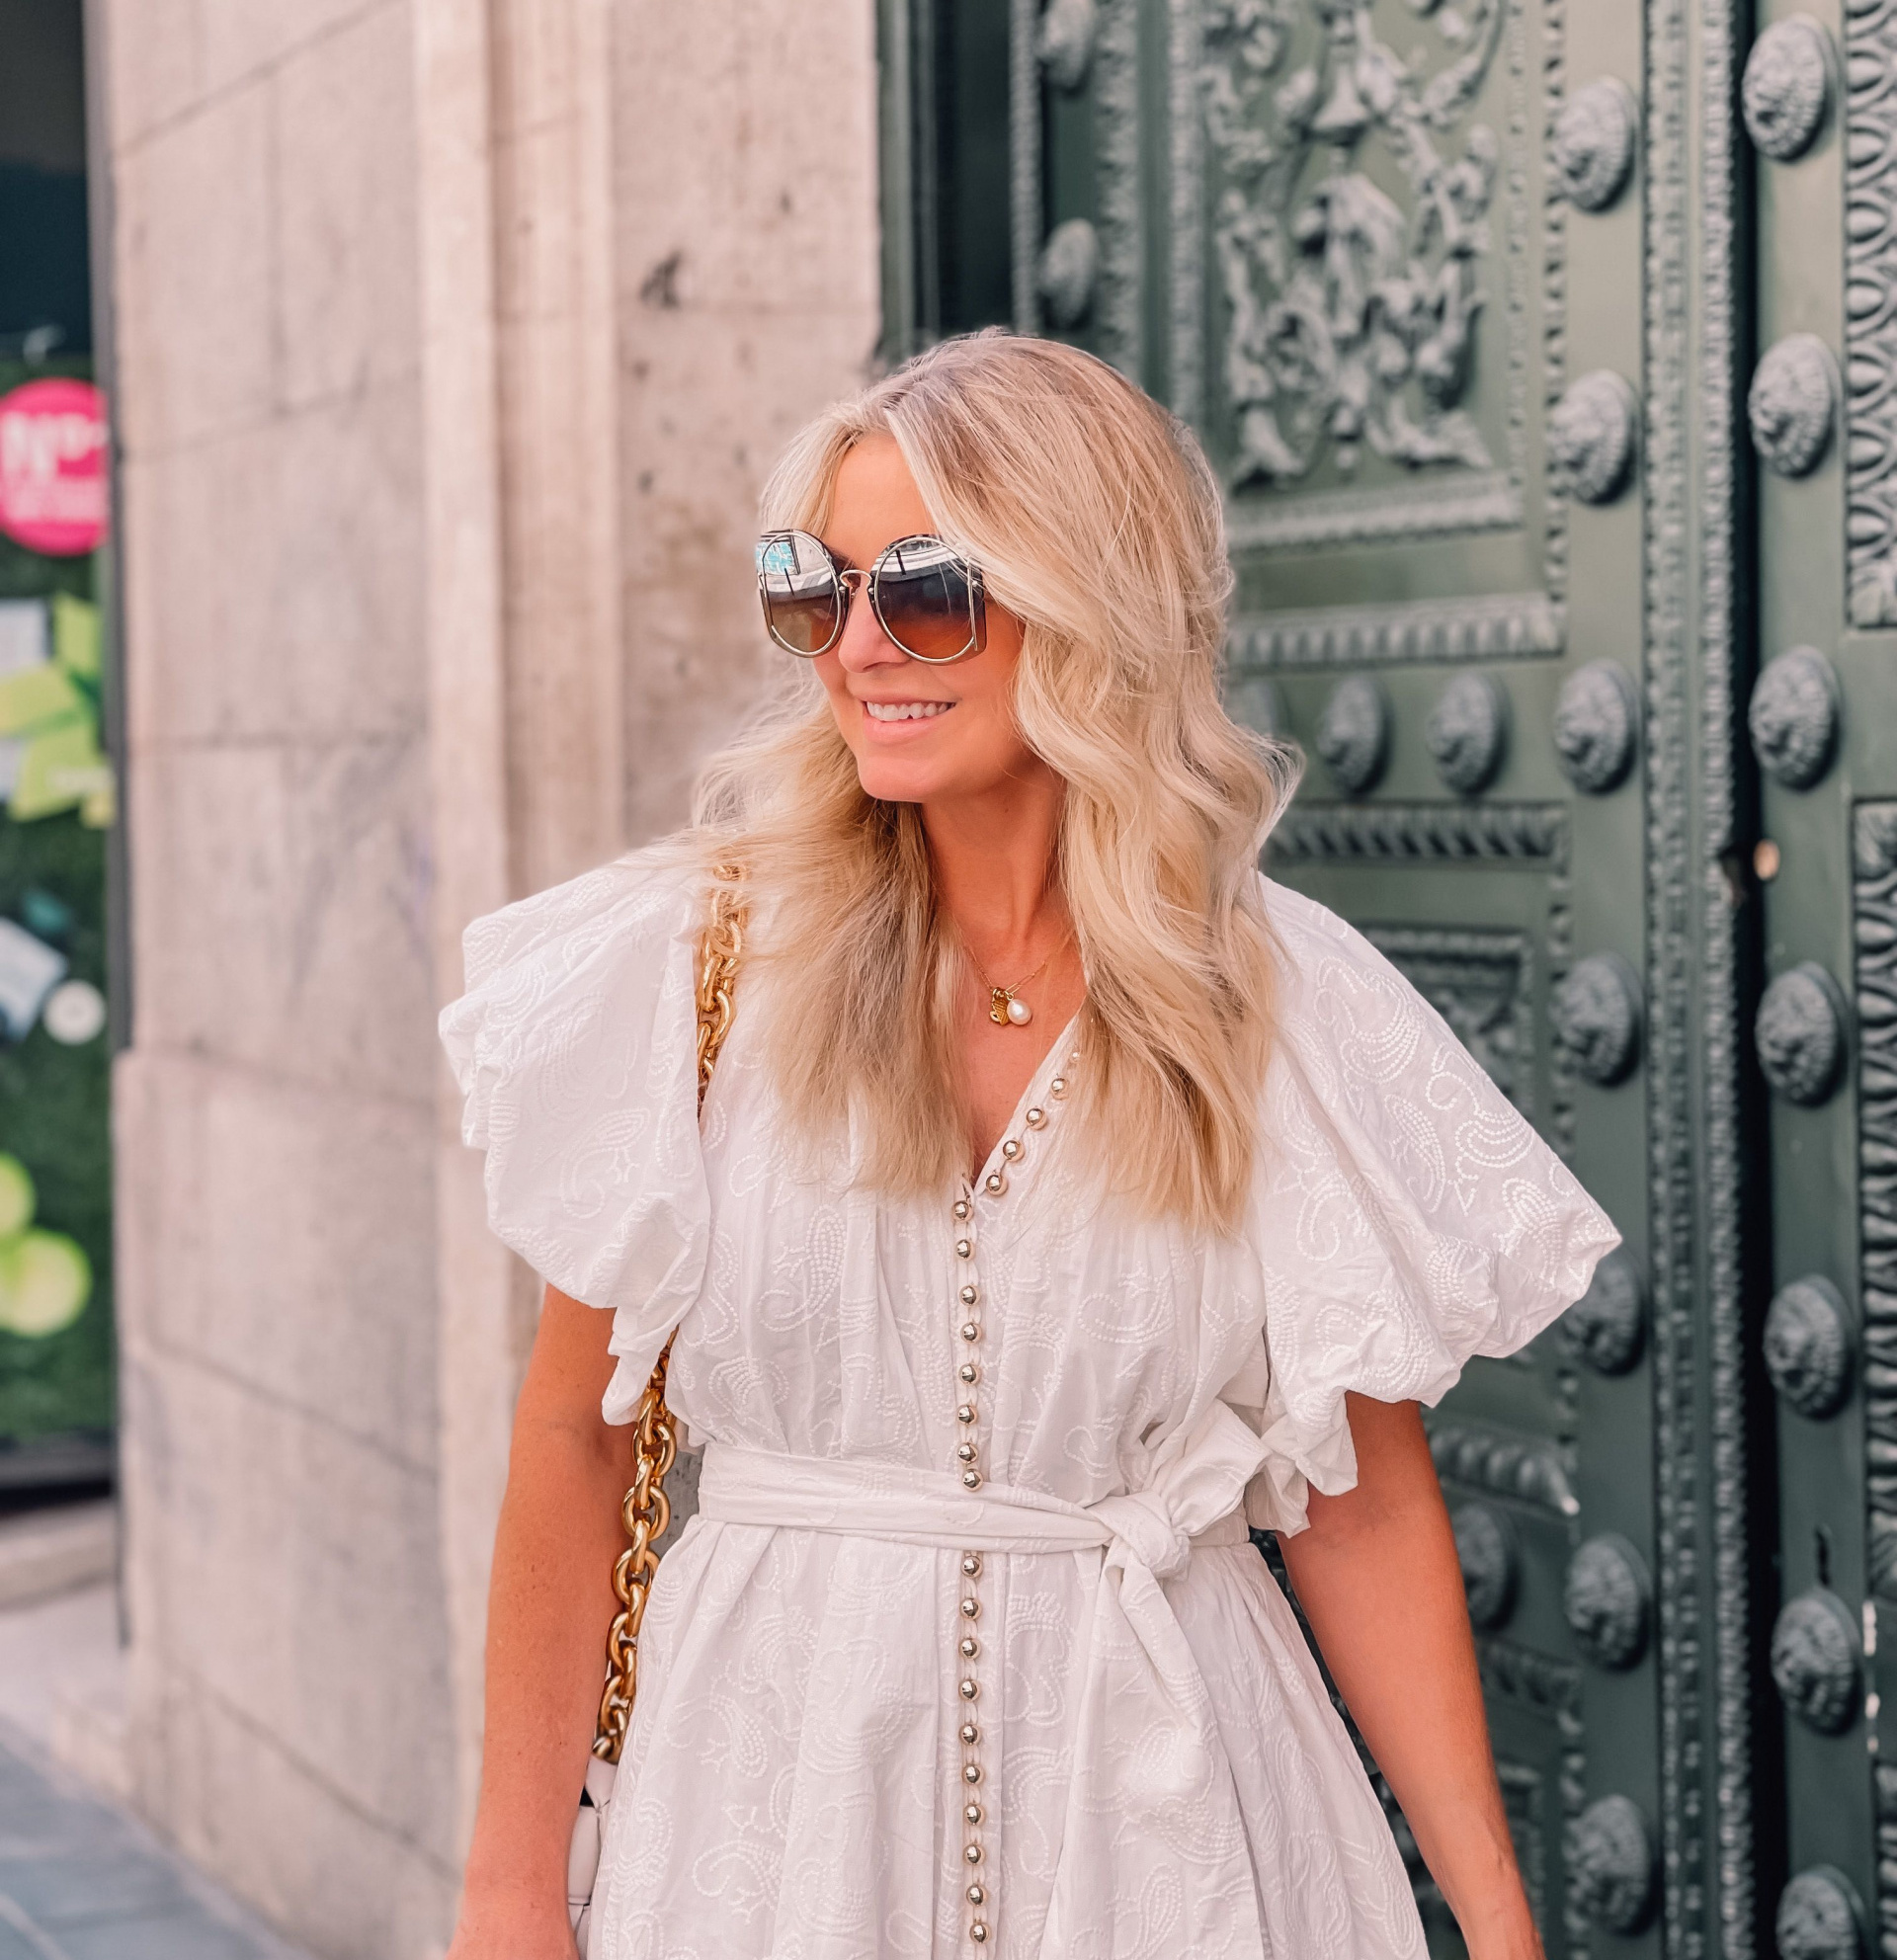 white dress by Acler with puff sleeves on fashion over 40 blogger Erin Busbee in Madrid Spain